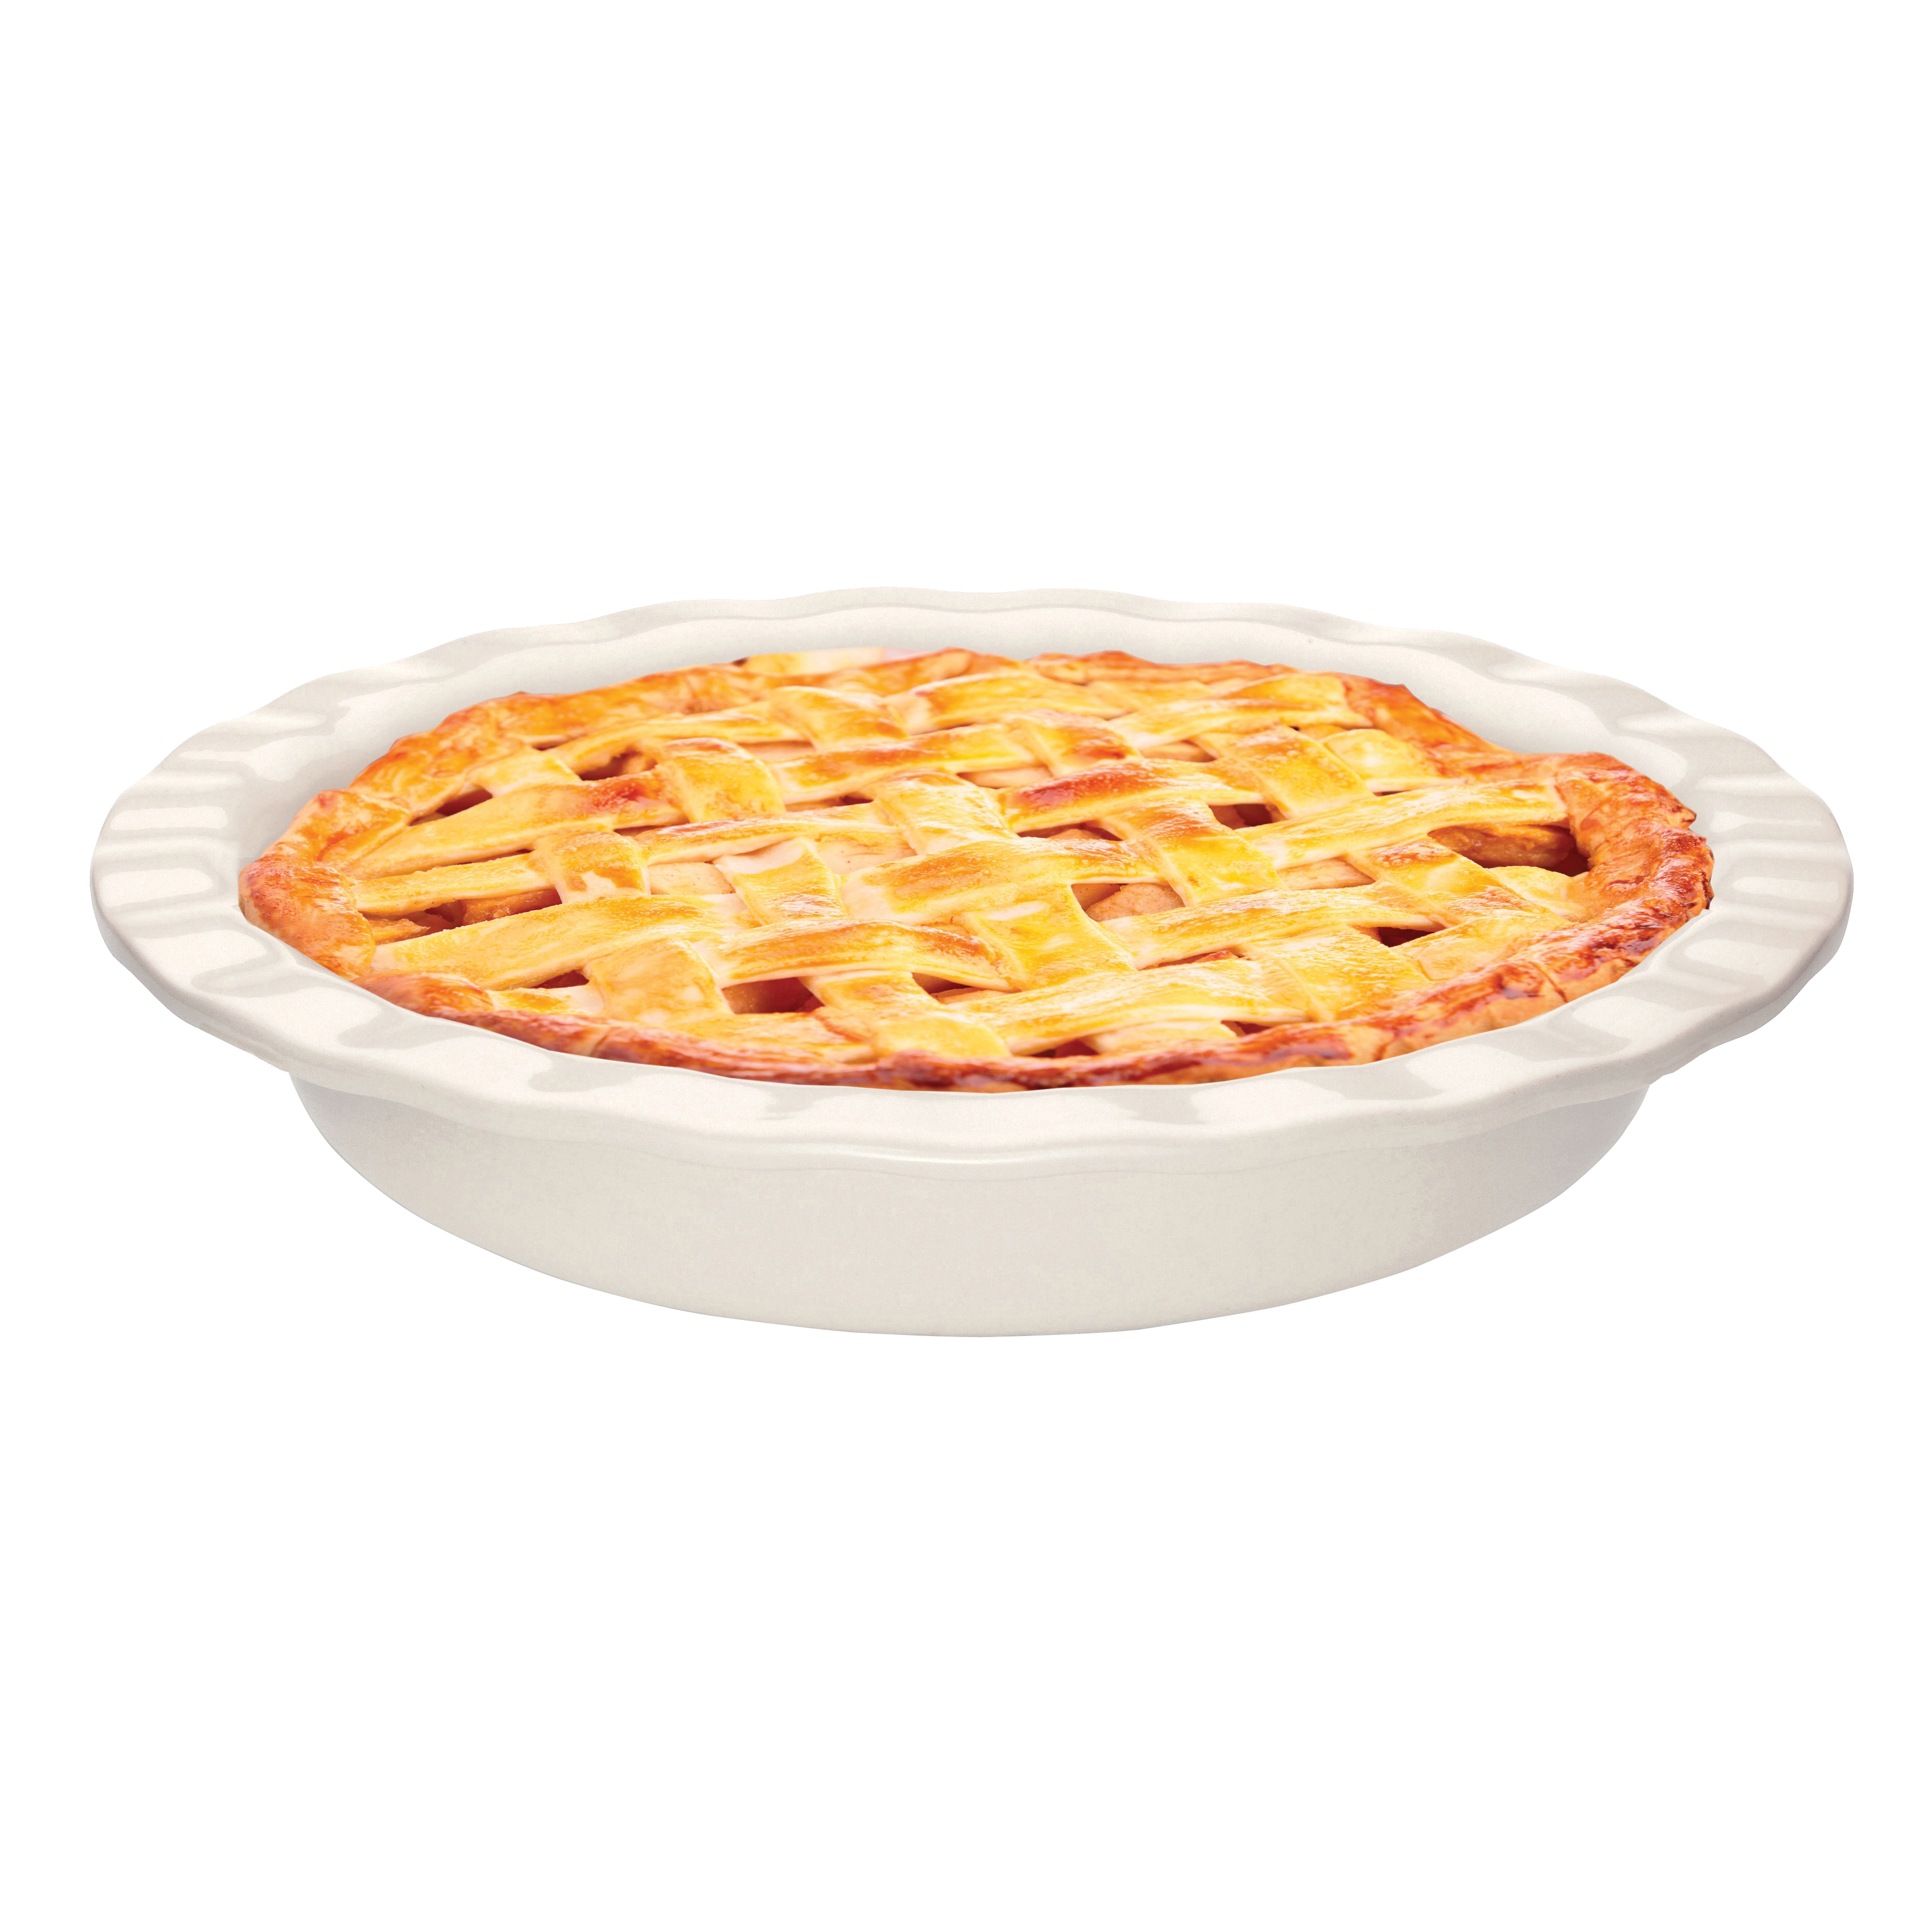 Mrs Anderson's Baking 98063 Pie Plate, 9.5 qt Capacity, 9-1/2 in Dia, Ceramic, White, Dishwasher Safe: Yes - 3